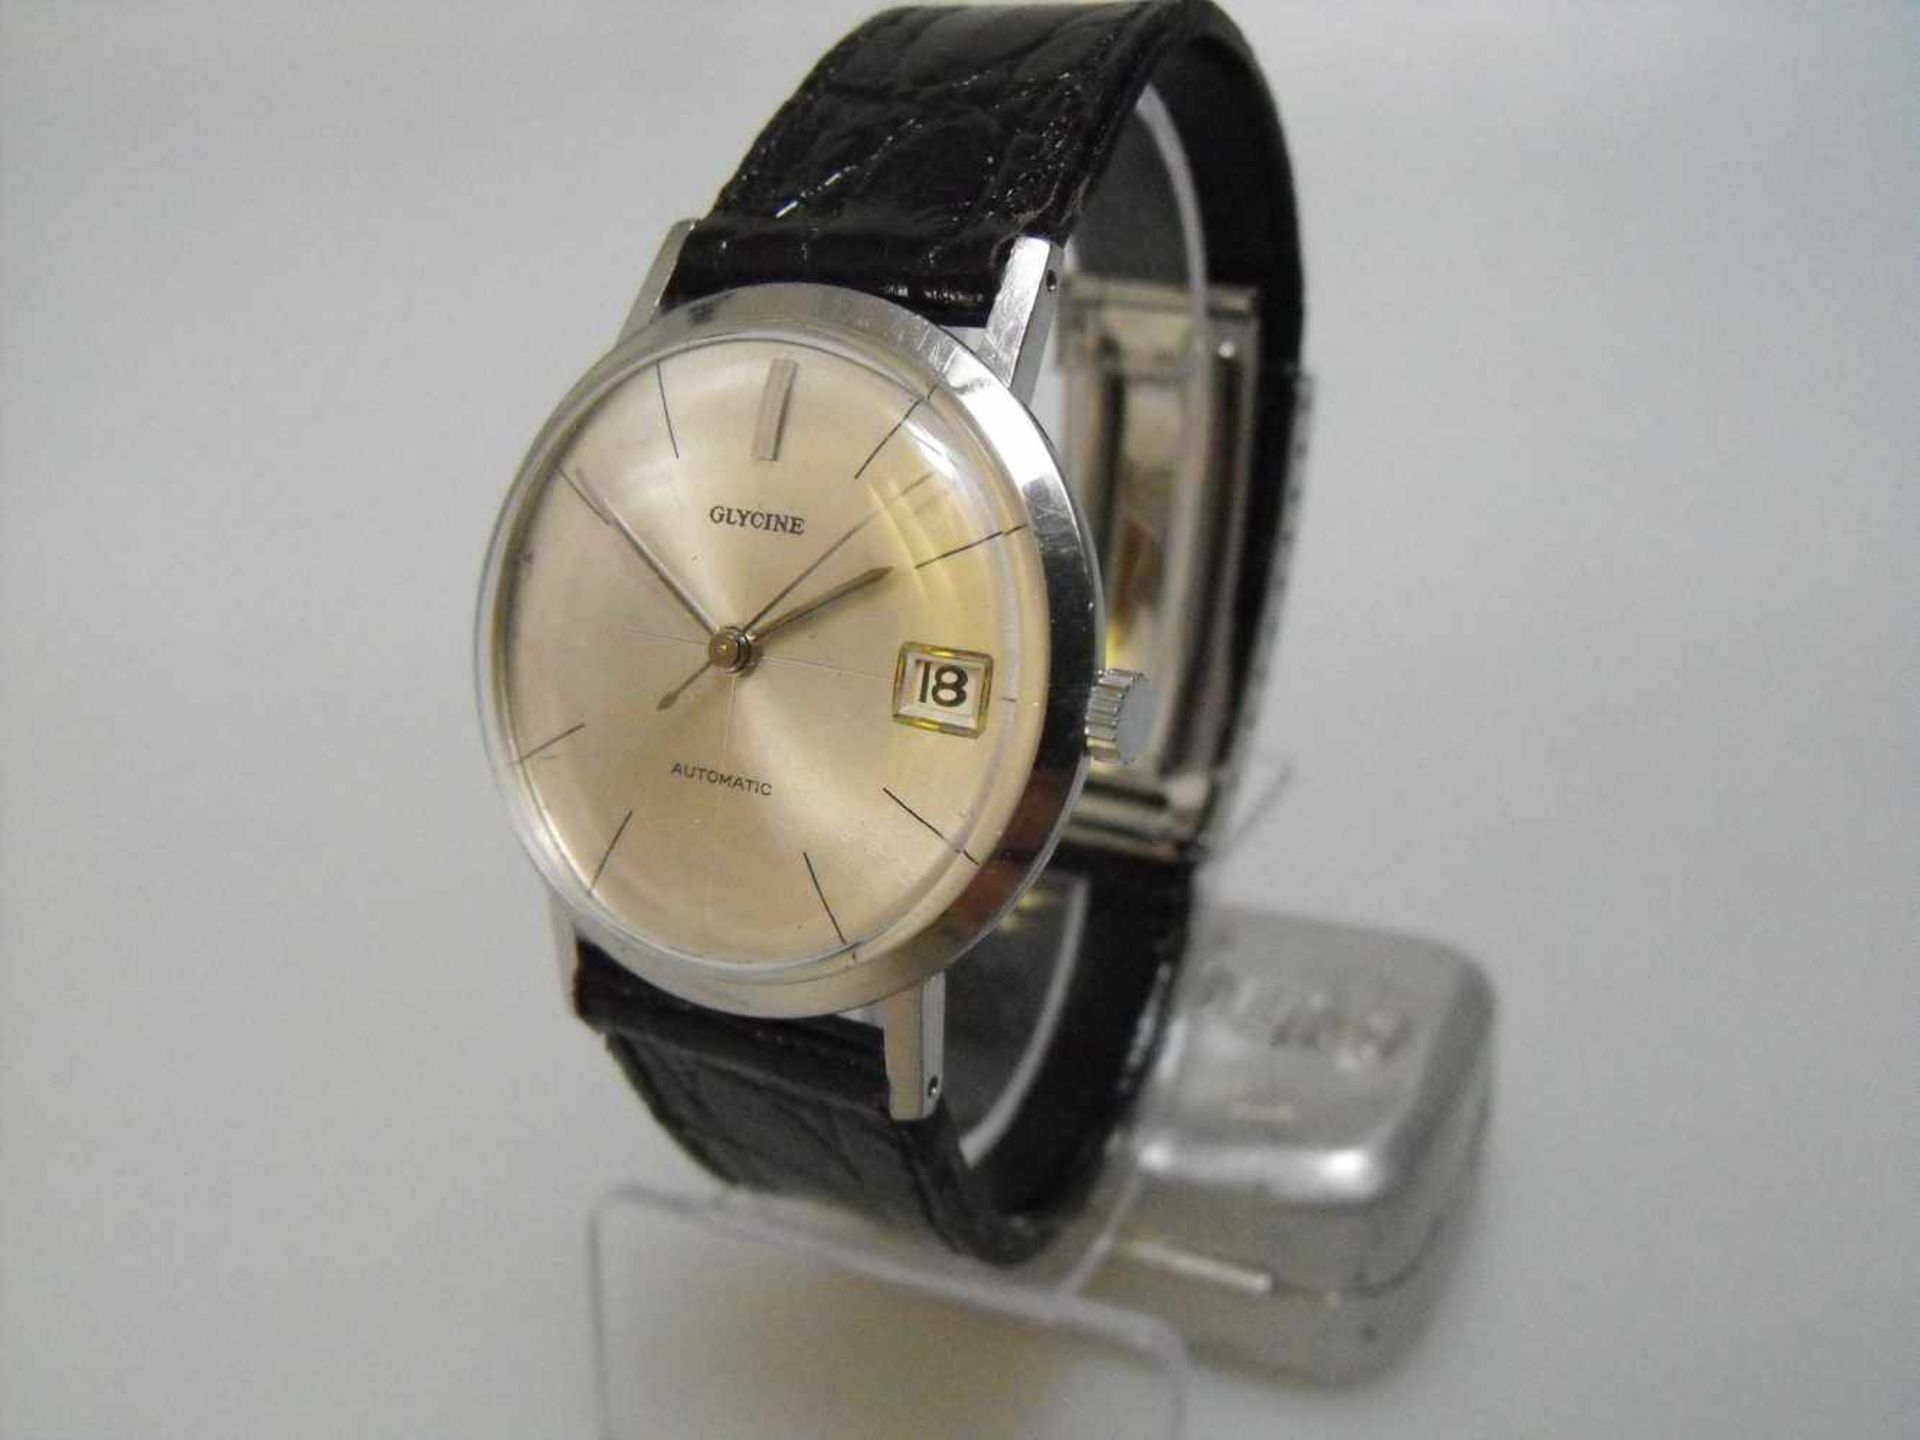 Glycine Automatic Date Mens Vintage Wrist Watch - circa 1950s - Image 2 of 7